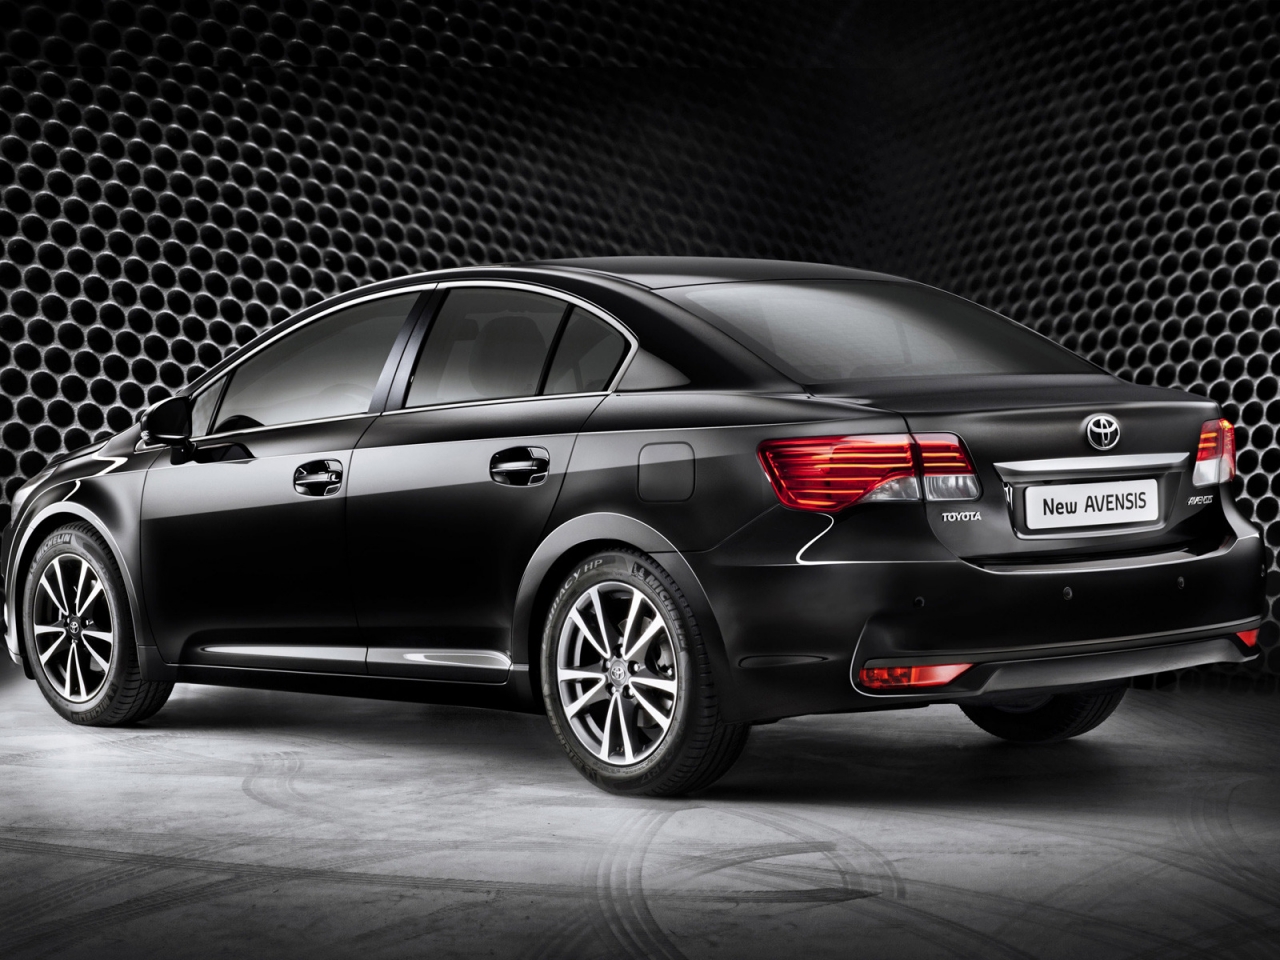 Toyota Avensis 2012 for 1280 x 960 resolution